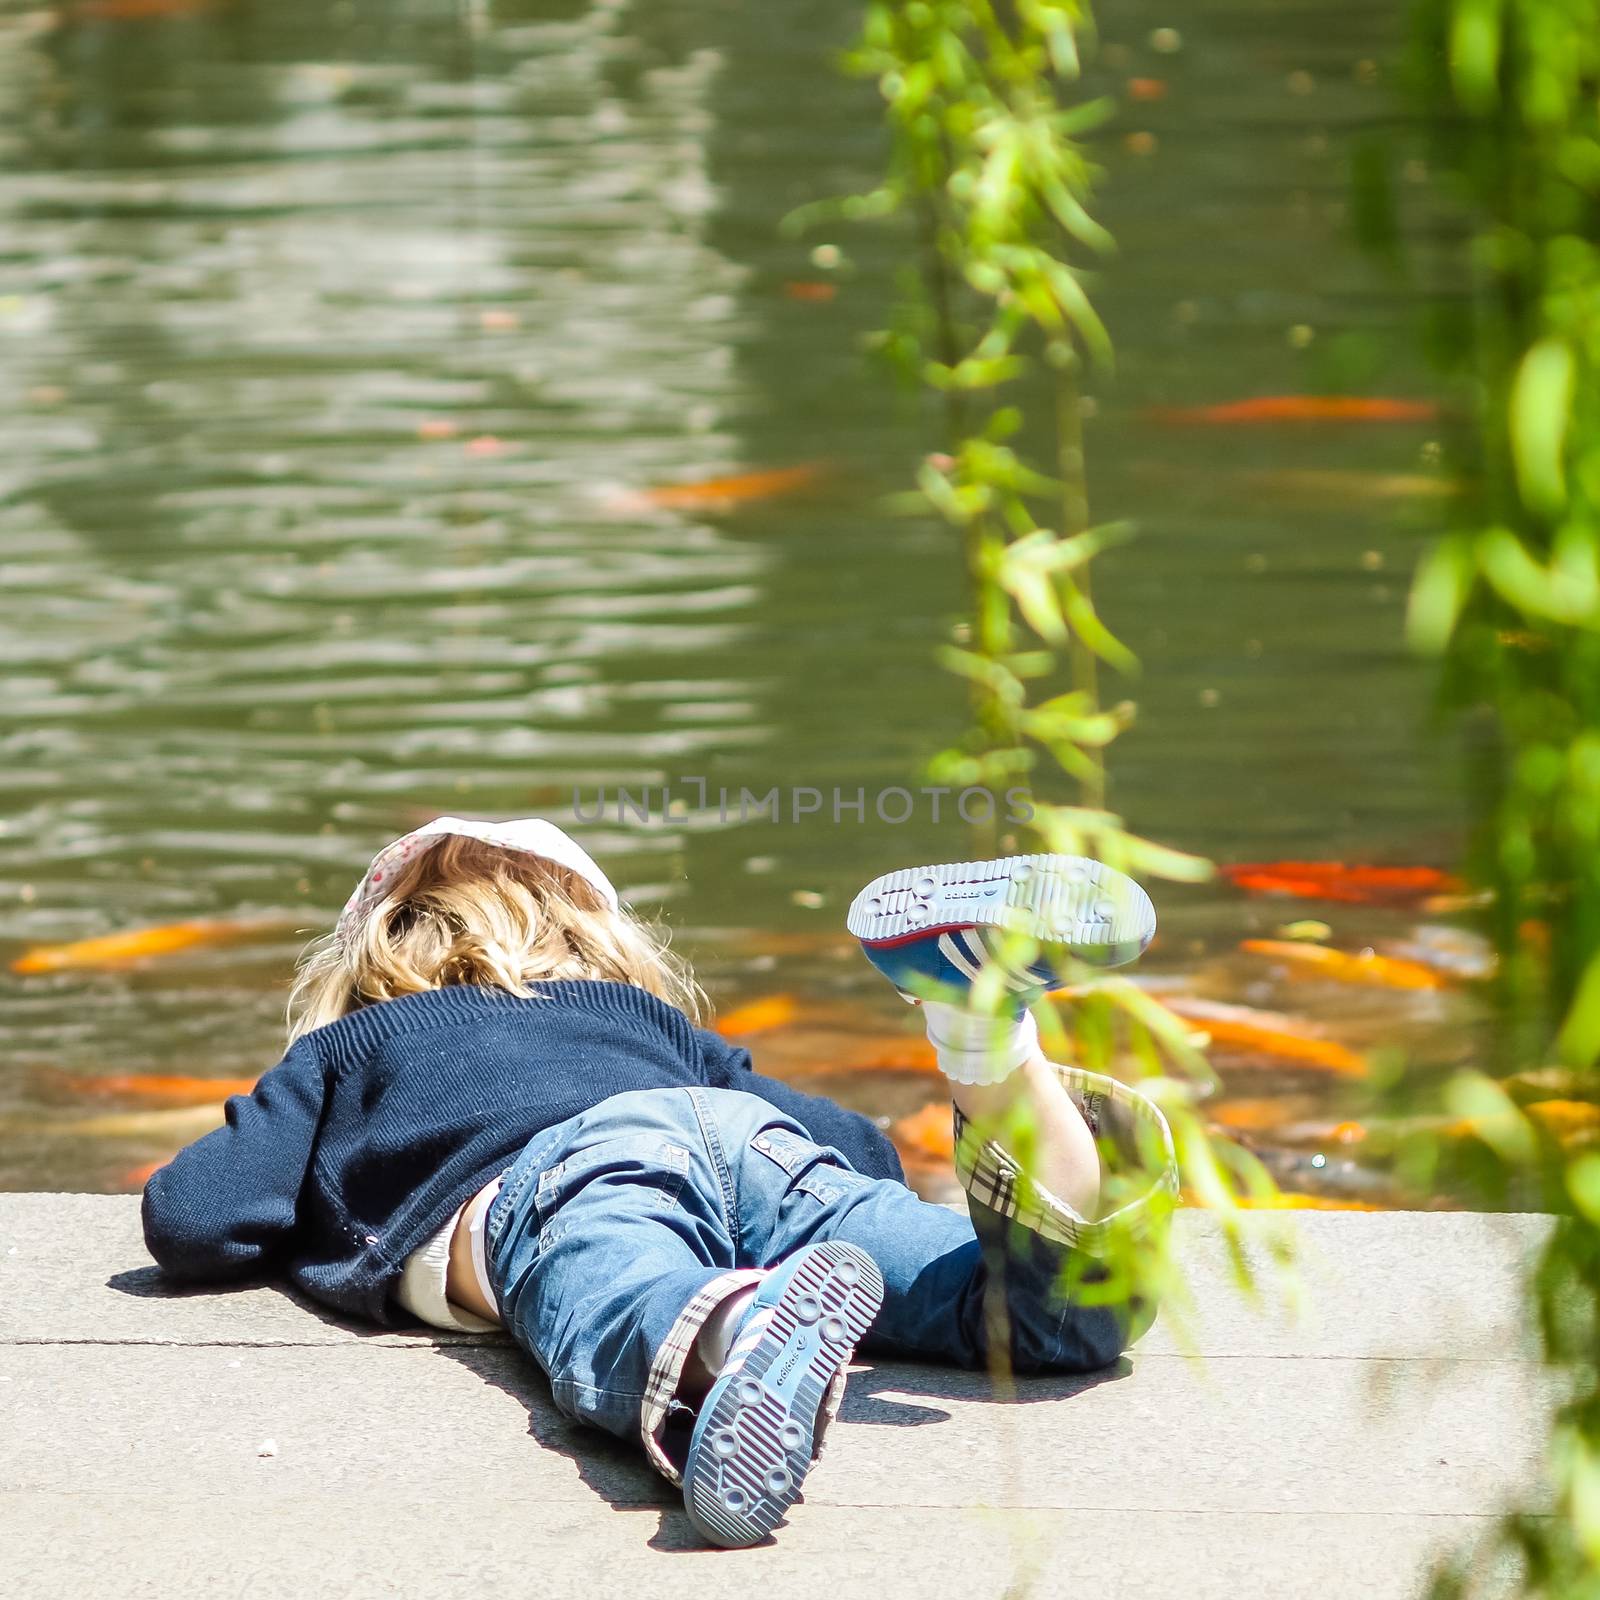 SHANGHAI, CHINA - April 12, 2011 : European girl in blue is playing with the carp fish in the pond.